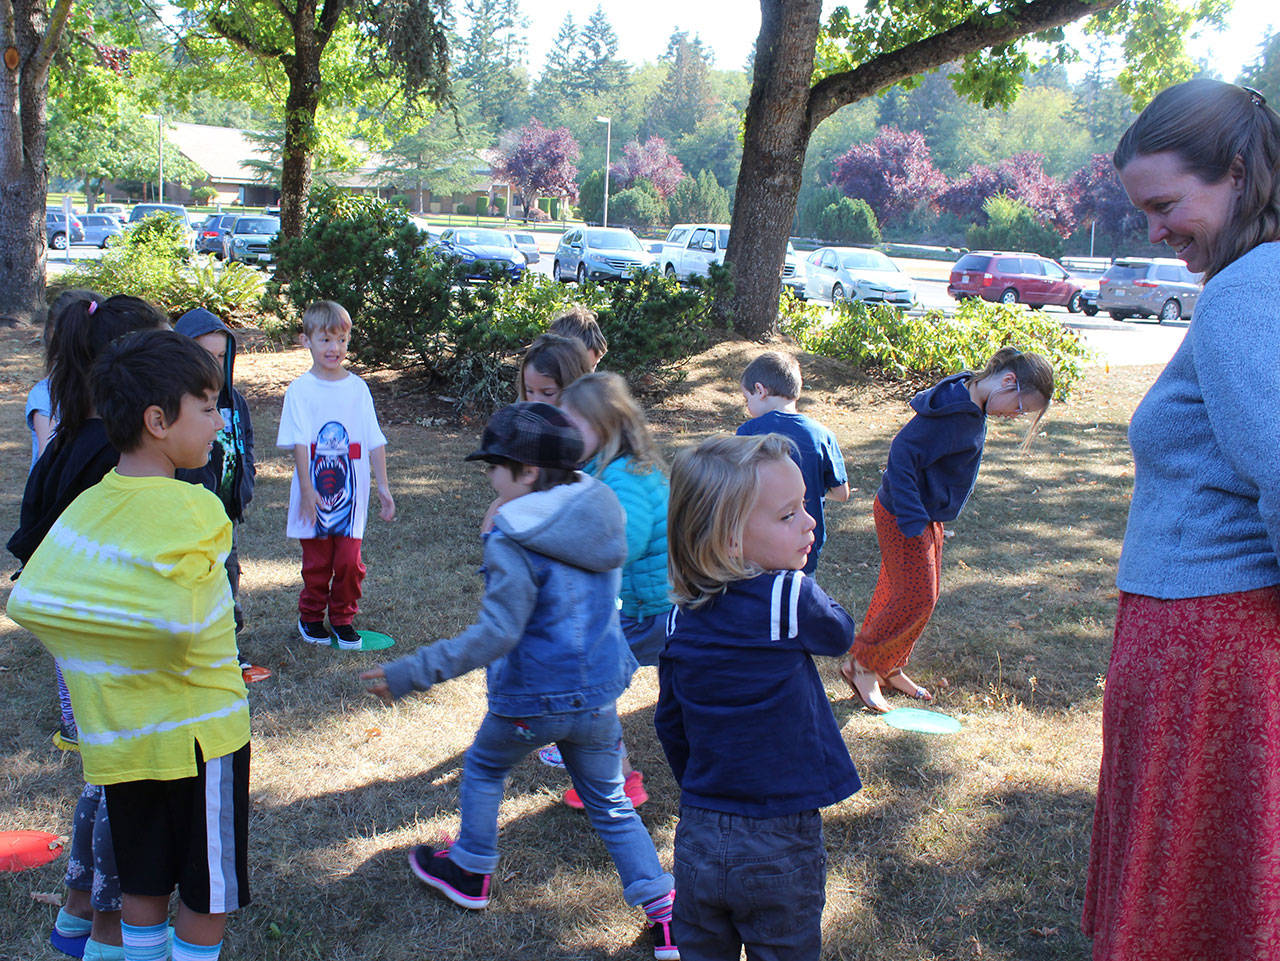 On the first day of school Tuesday, Sarah Gillette took her South Whidbey Academy class outside for a learning skills game. Some 1,300 students reported to four district schools as scheduled when a teachers strike was averted with a last-minute deal. (Photo by Patricia Guthrie/Whidbey News Group)